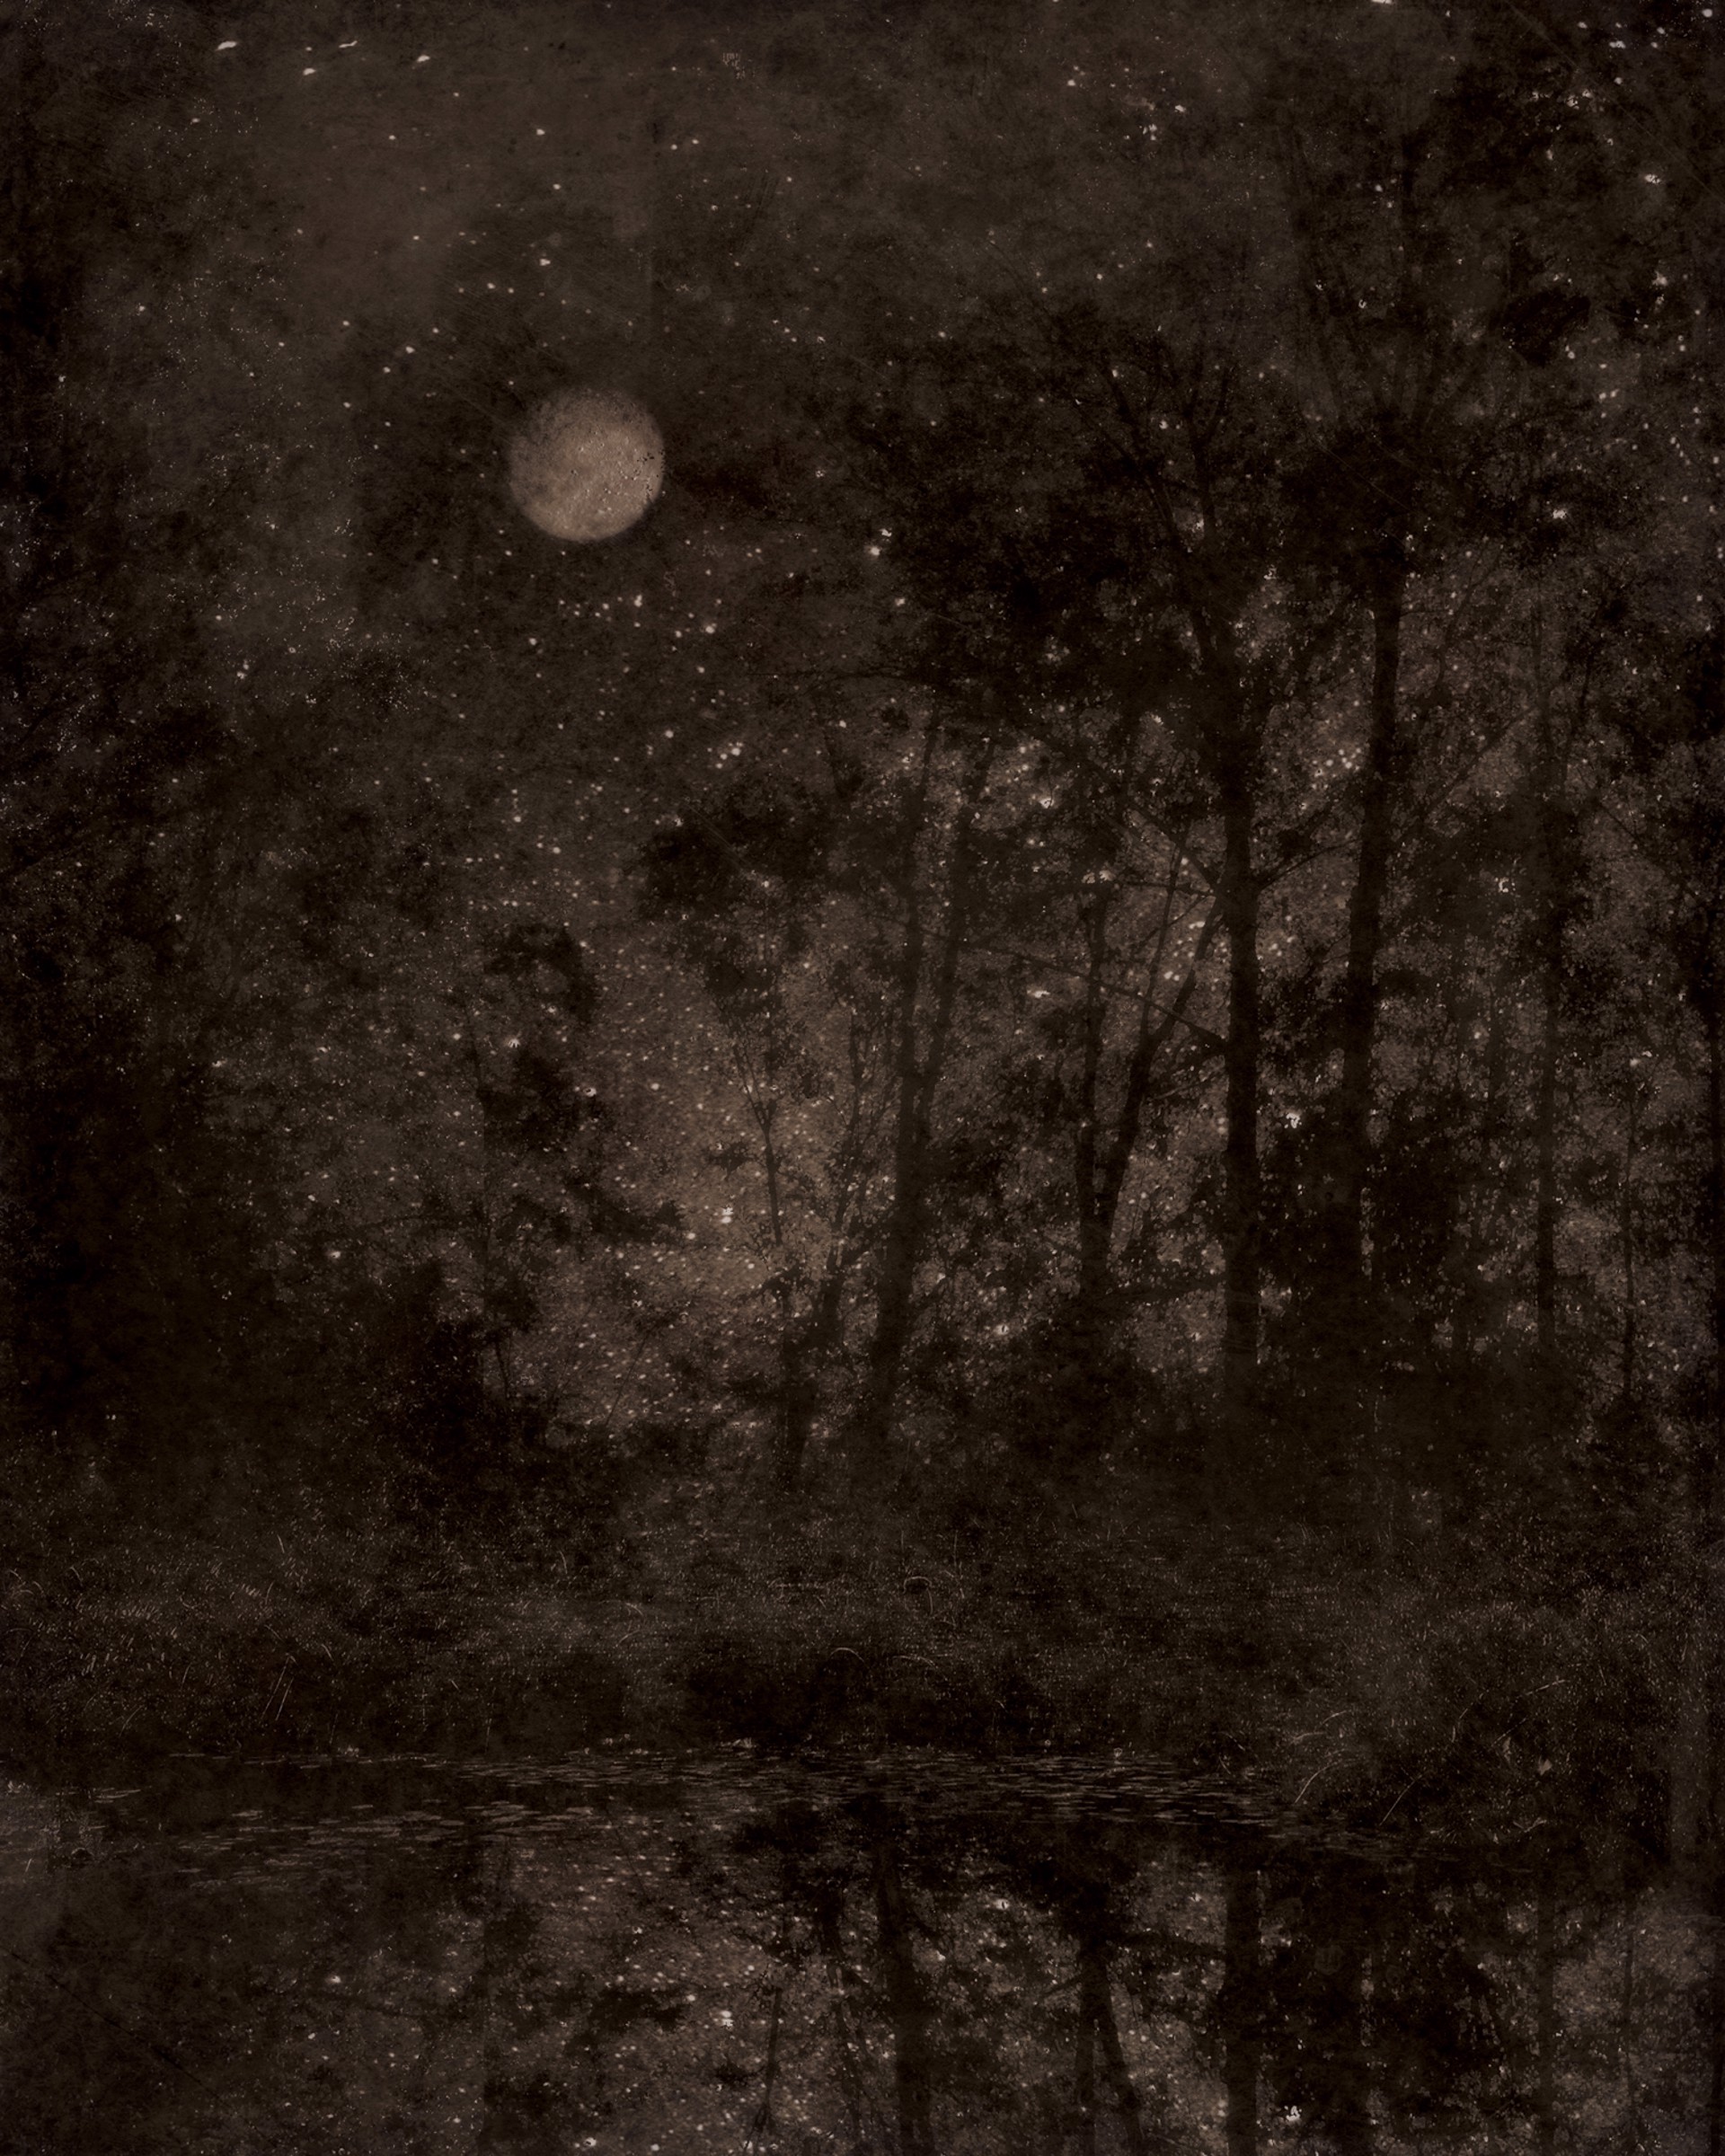 Nocturnal Landscape 108 by Ted Kincaid